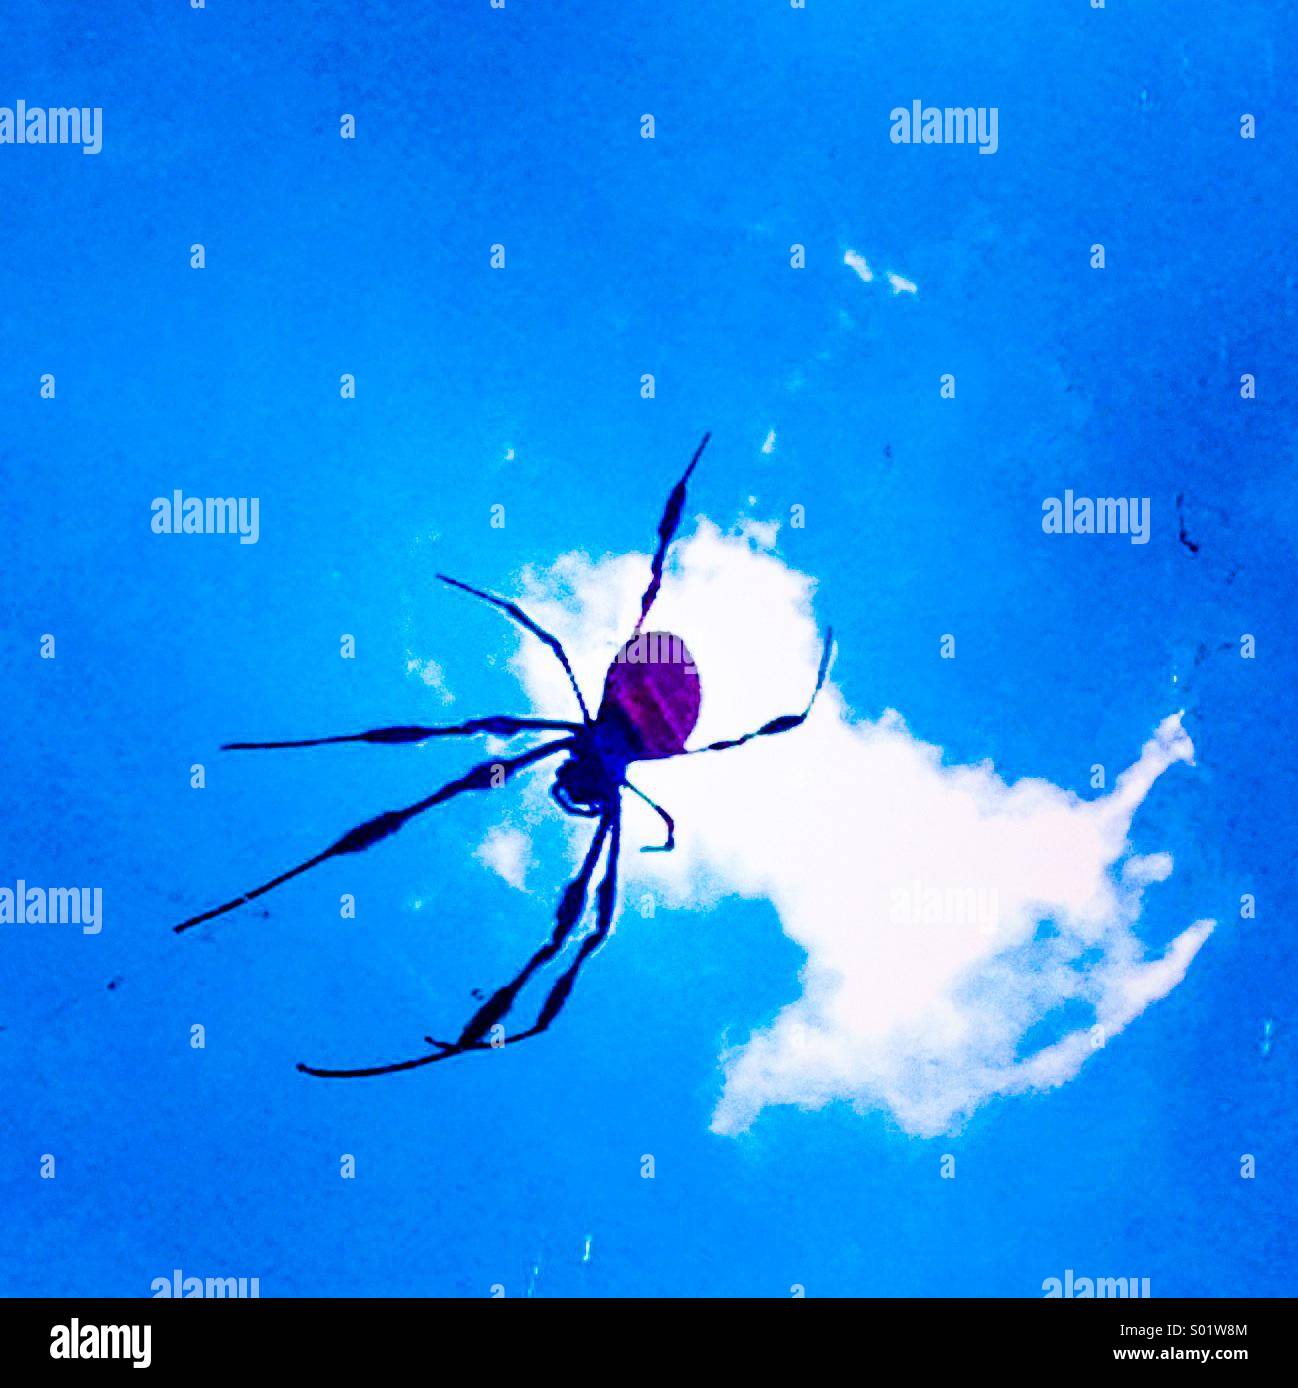 Spider In the cloud Stock Photo